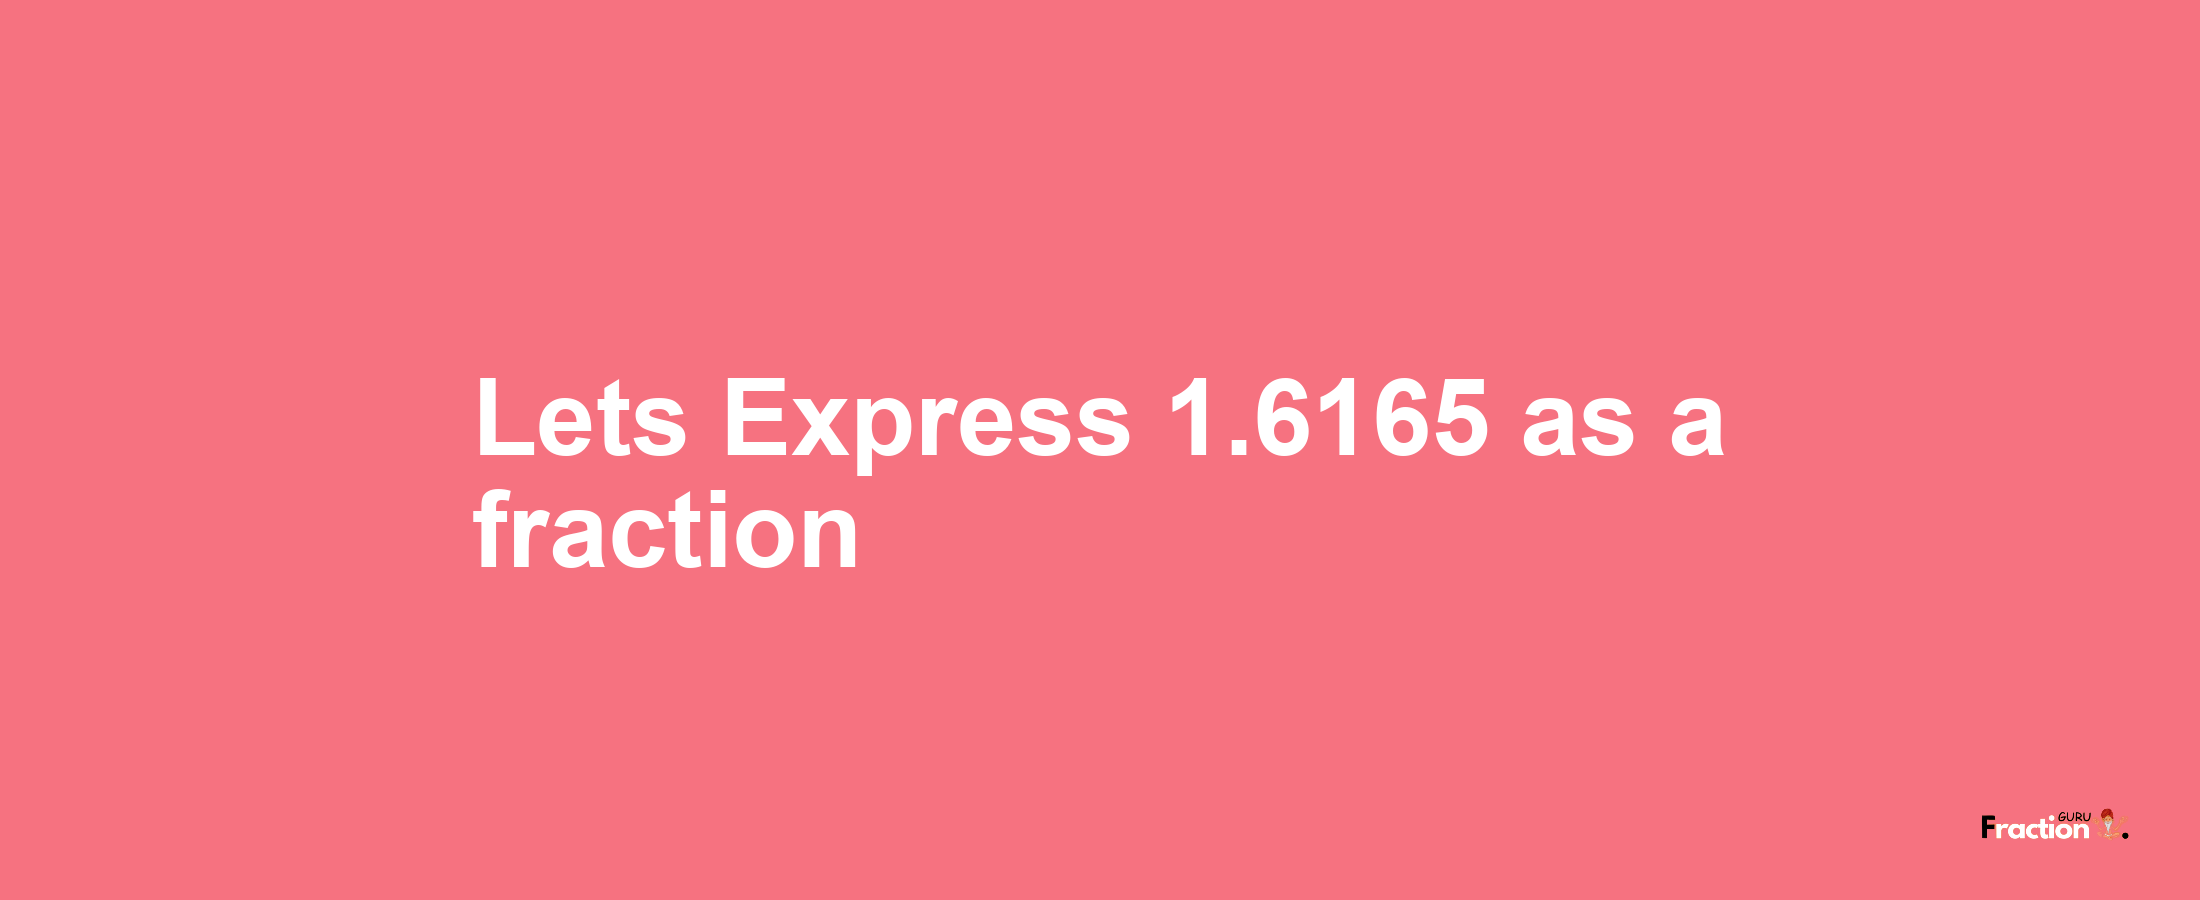 Lets Express 1.6165 as afraction